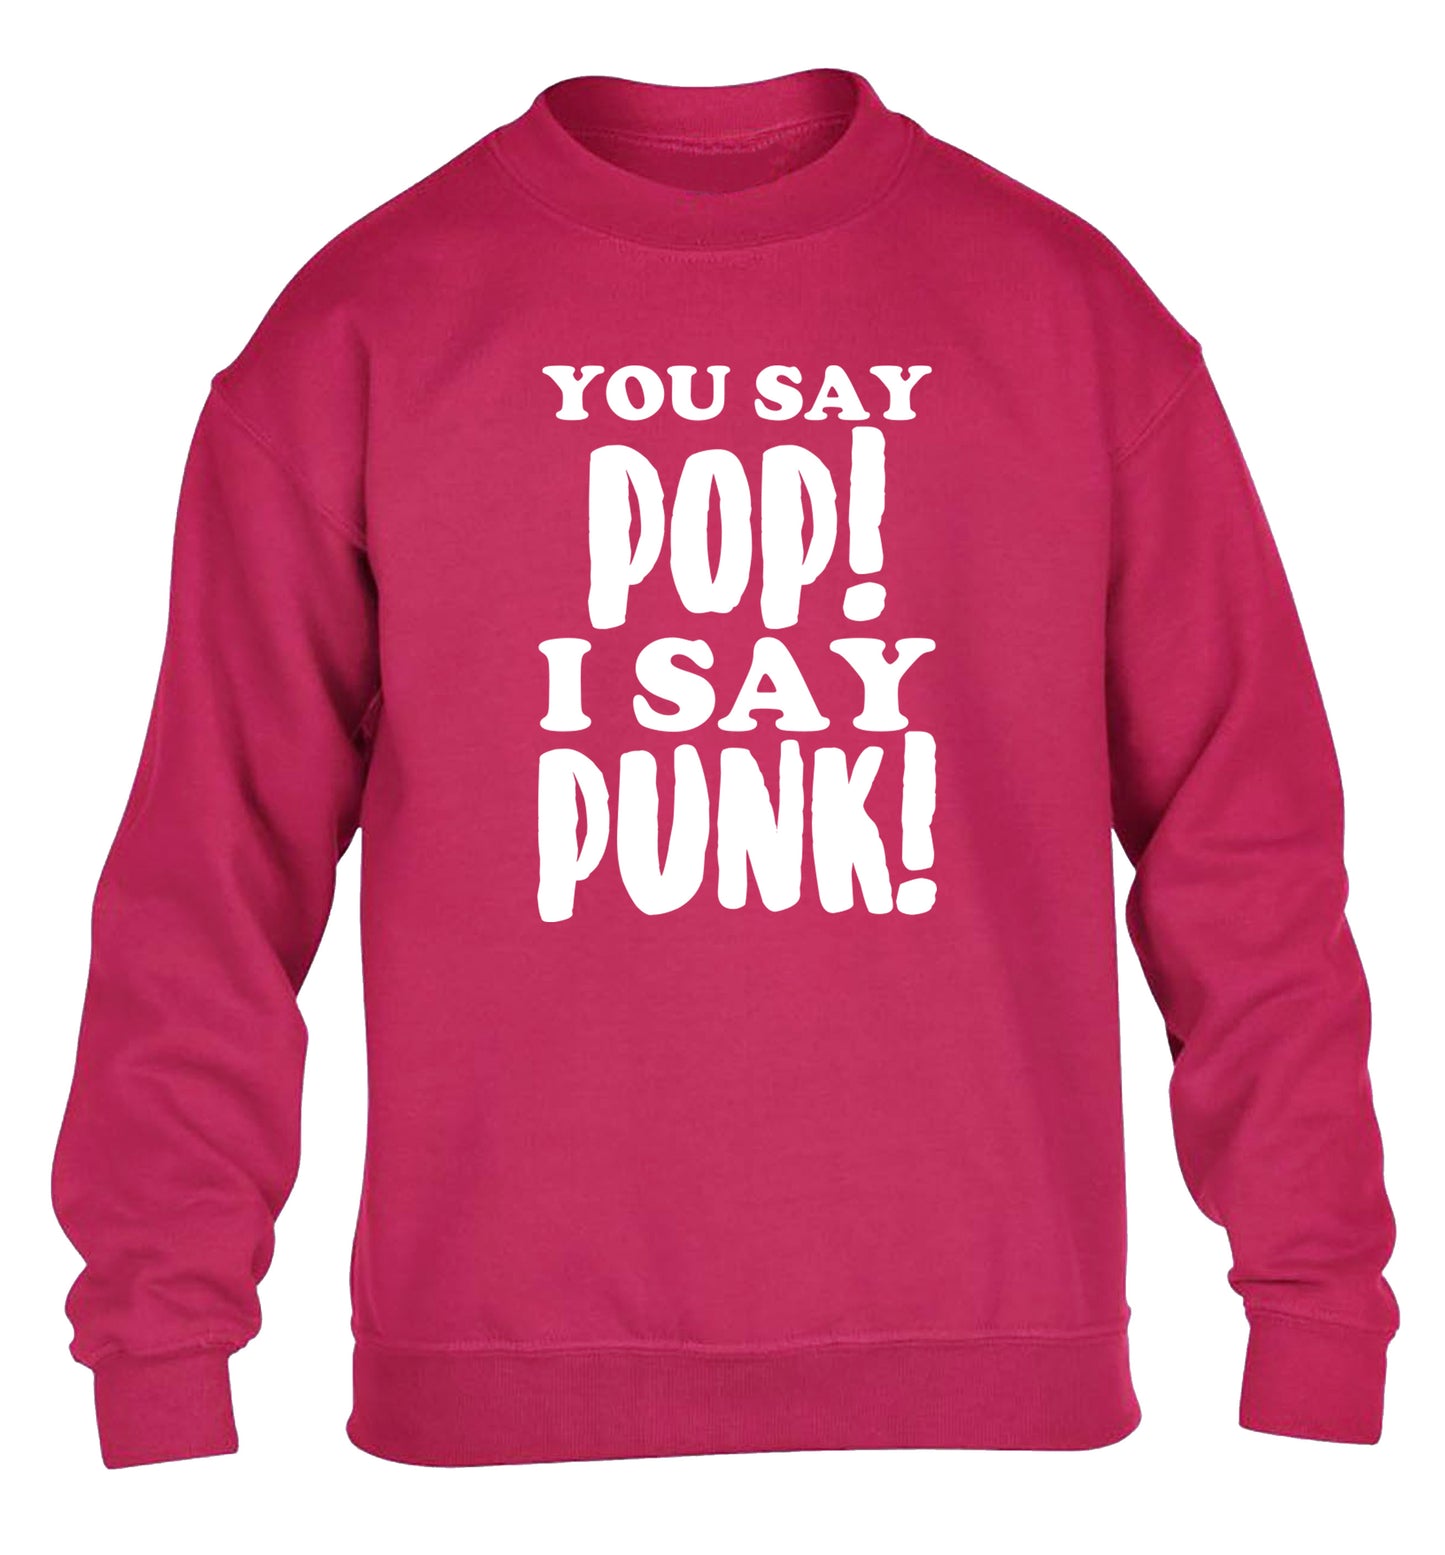 You say pop I say punk! children's pink sweater 12-14 Years